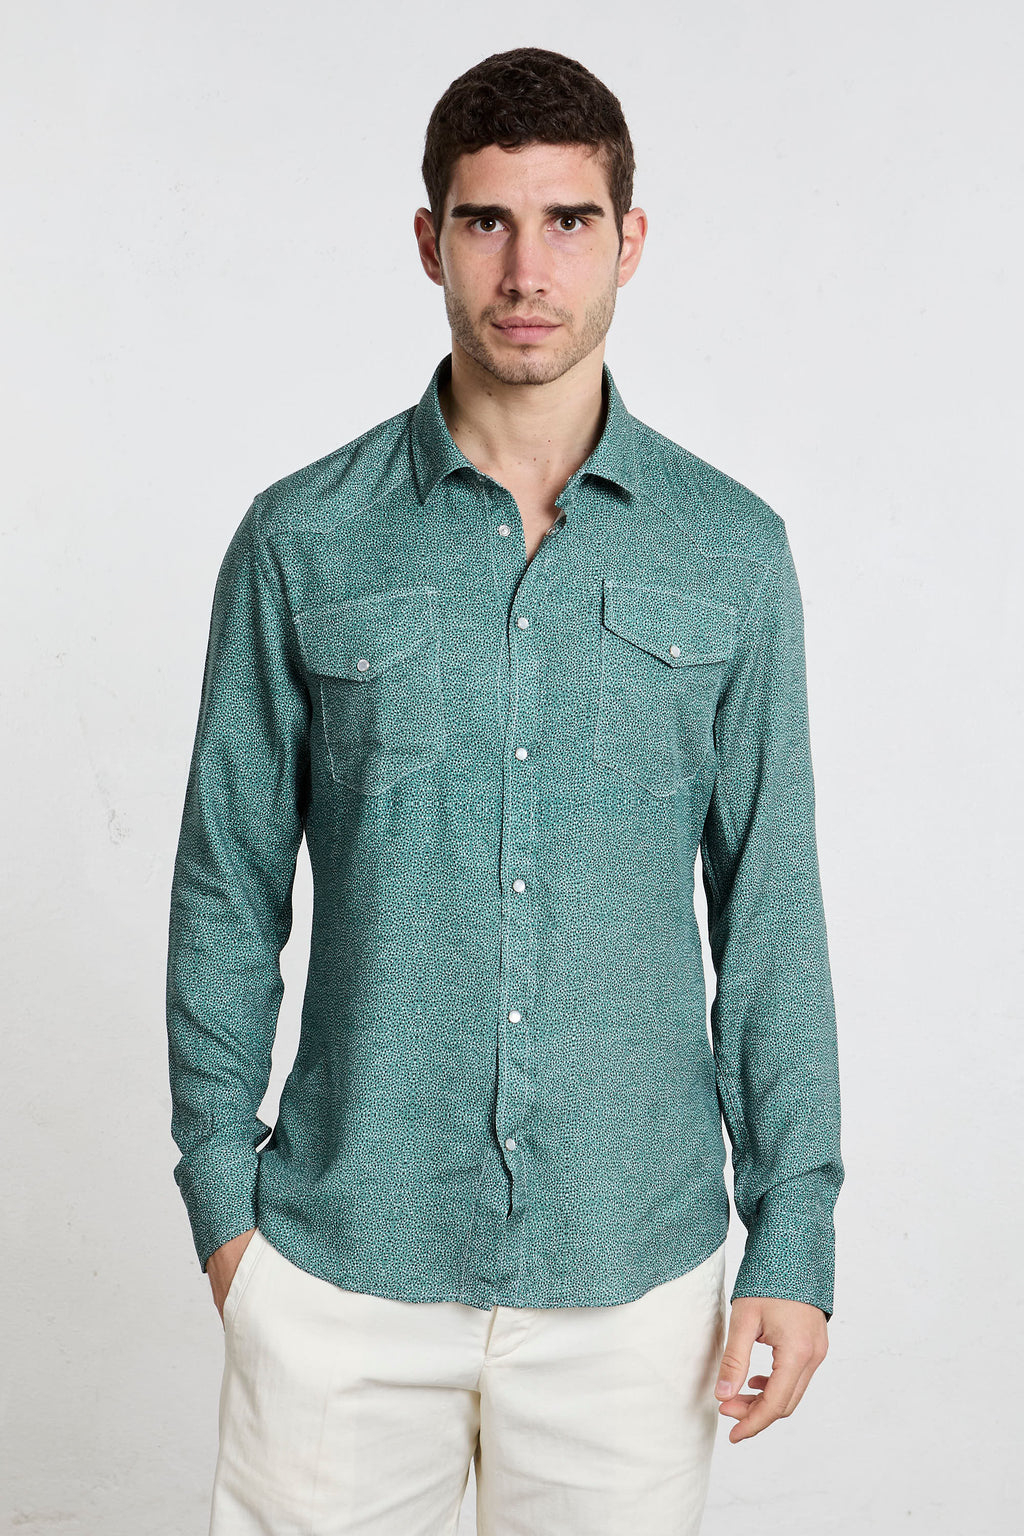 Benevierre Paisley Patterned Partridge Point Shirt in Green Viscose